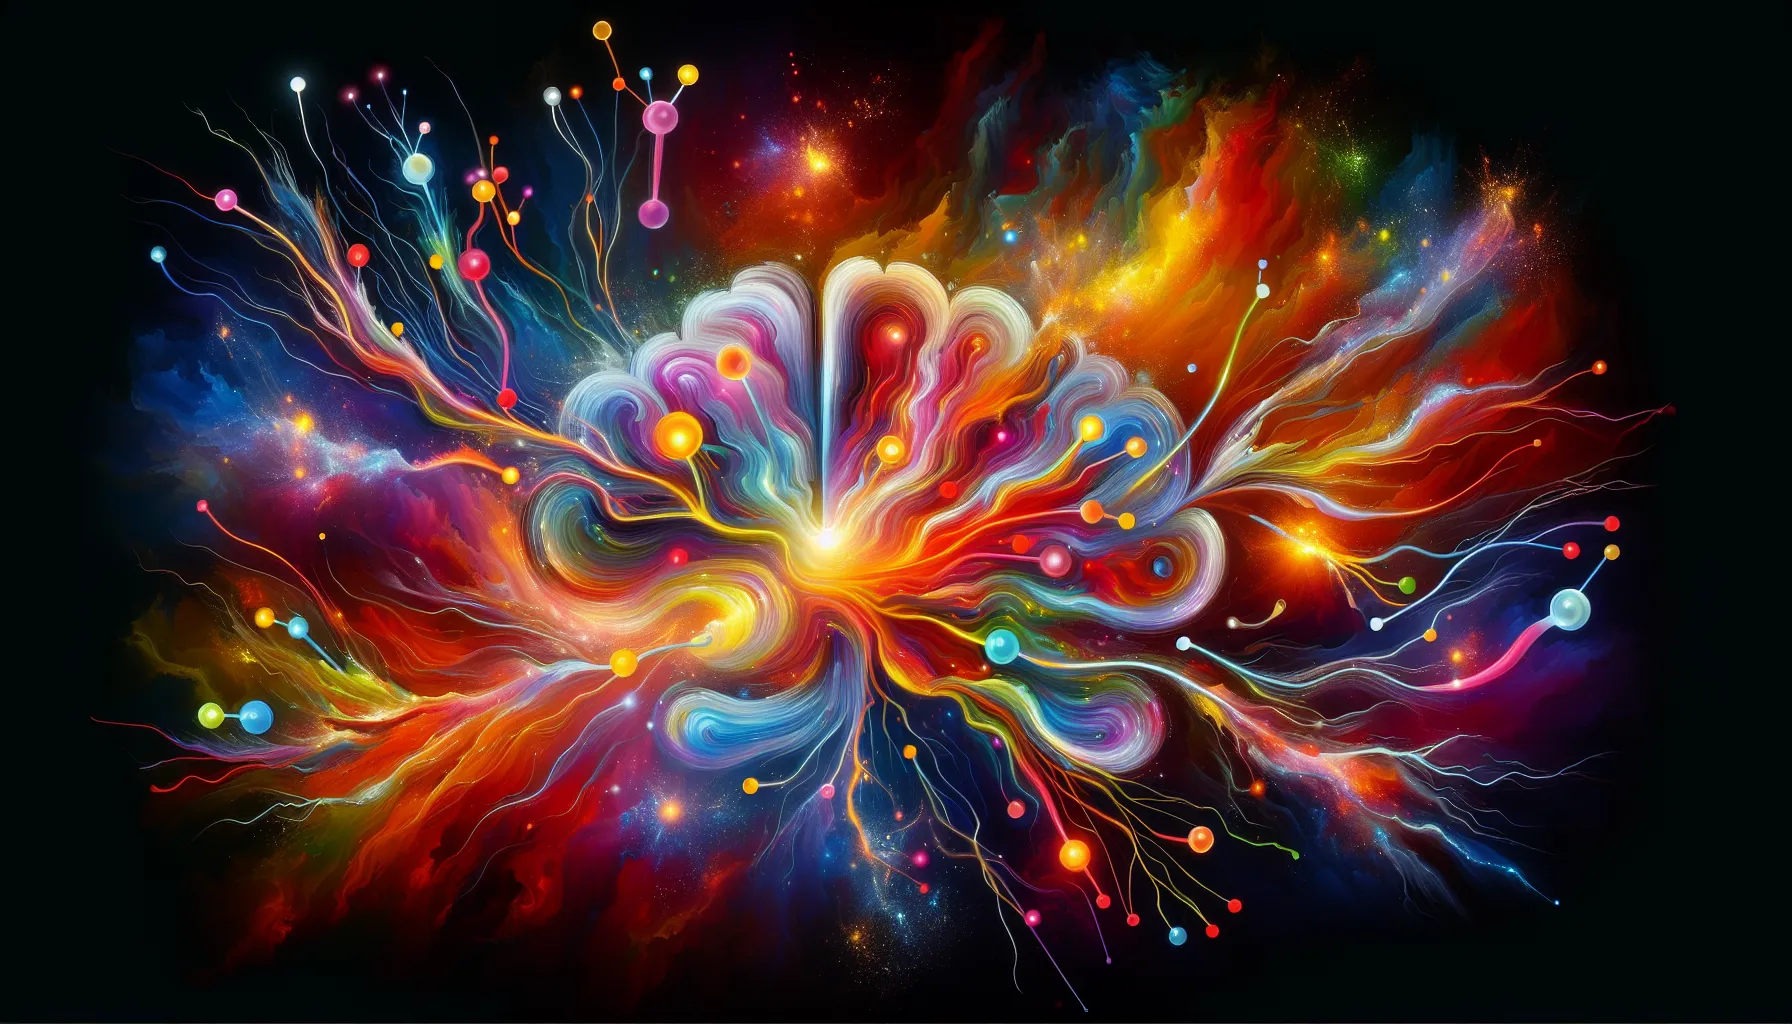 As neurons dance in a symphony of connection, love's chemistry ignites the mind's canvas, illustrating the unseen yet deeply felt alchemy that bonds hearts together.